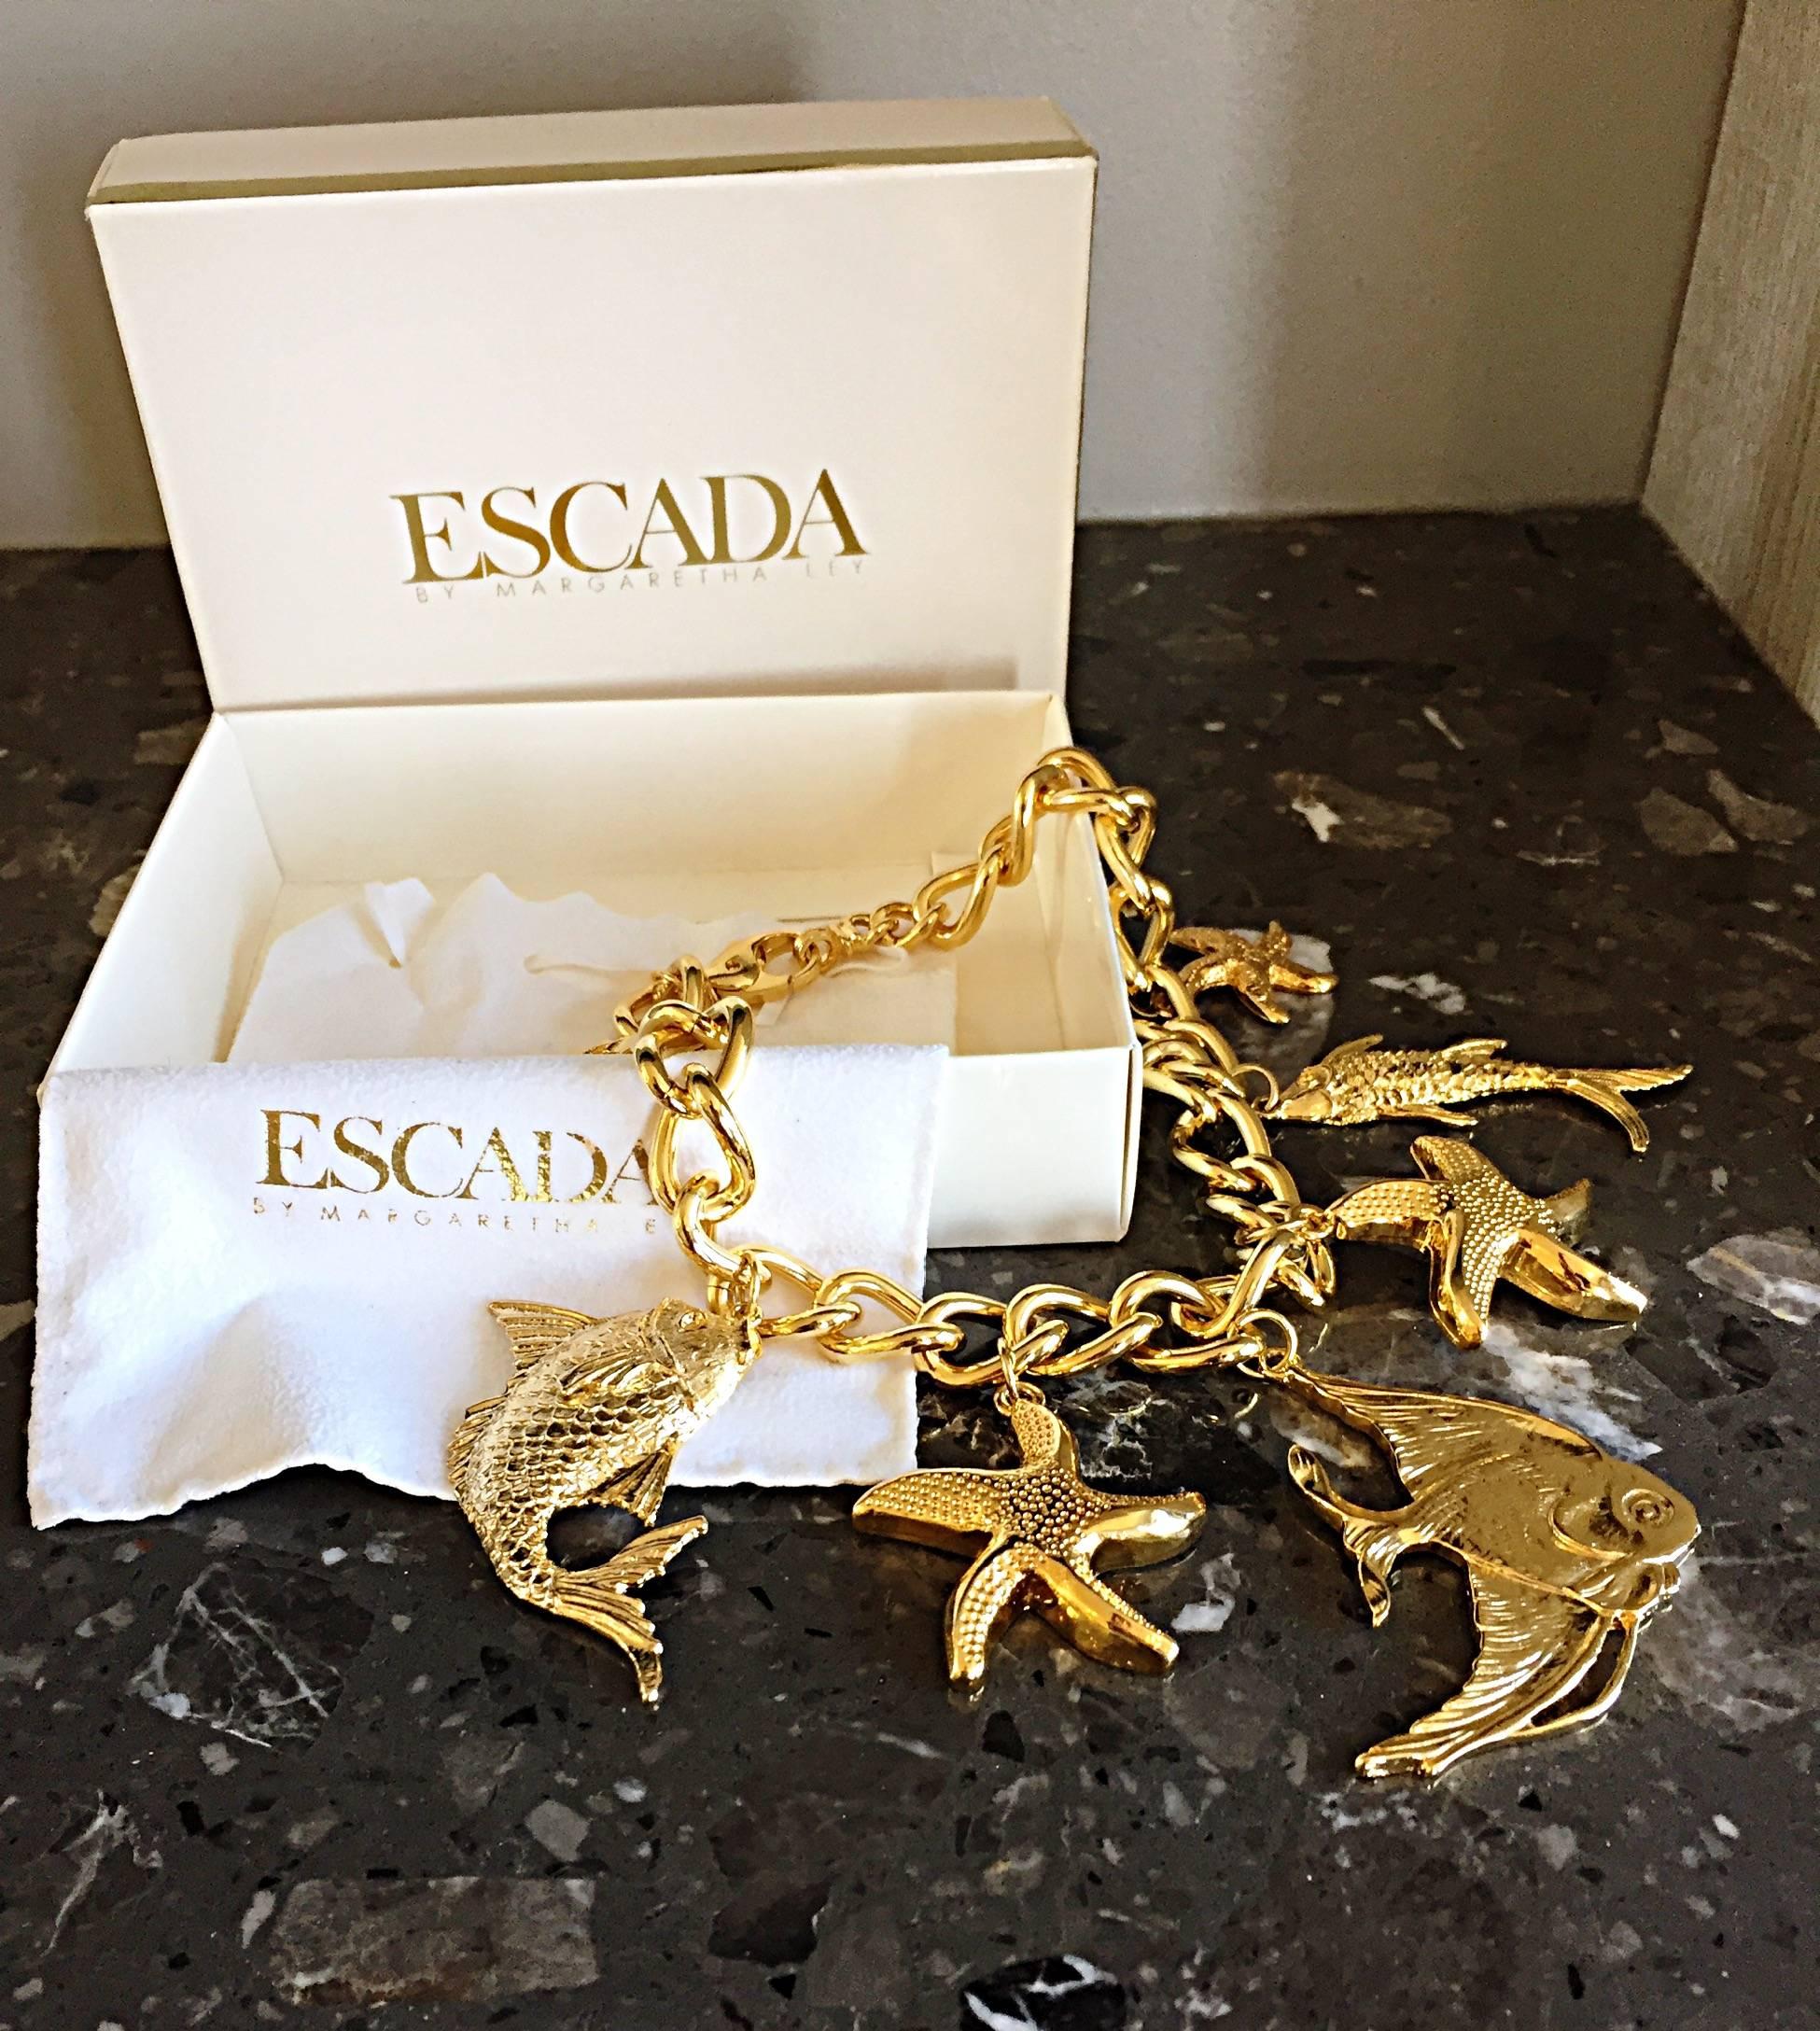 Gorgeous rare vintage ESCADA by MARGARETHA LEY gold oversized charm nautical necklace! Features giant charms of starfish, fish, etc. Comes with the original box and felt protective cover. Looks great with jeans or a dress. Pictured MICHAEL KORS